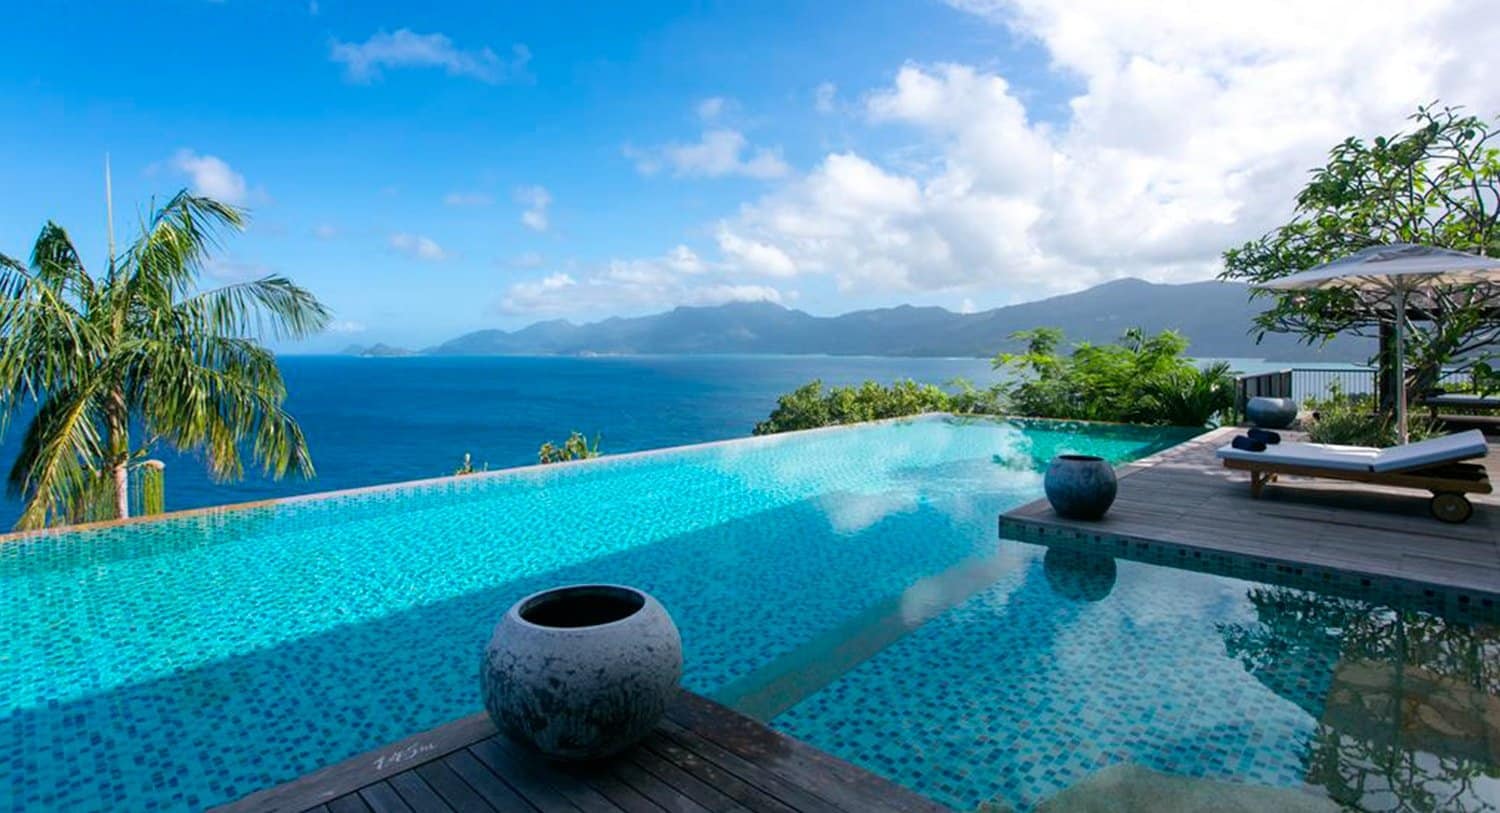 ARTICLE-Four saisons resort Seychelles named best resort in the Indianocean in 2015 Gallivanter'sawards for excellence